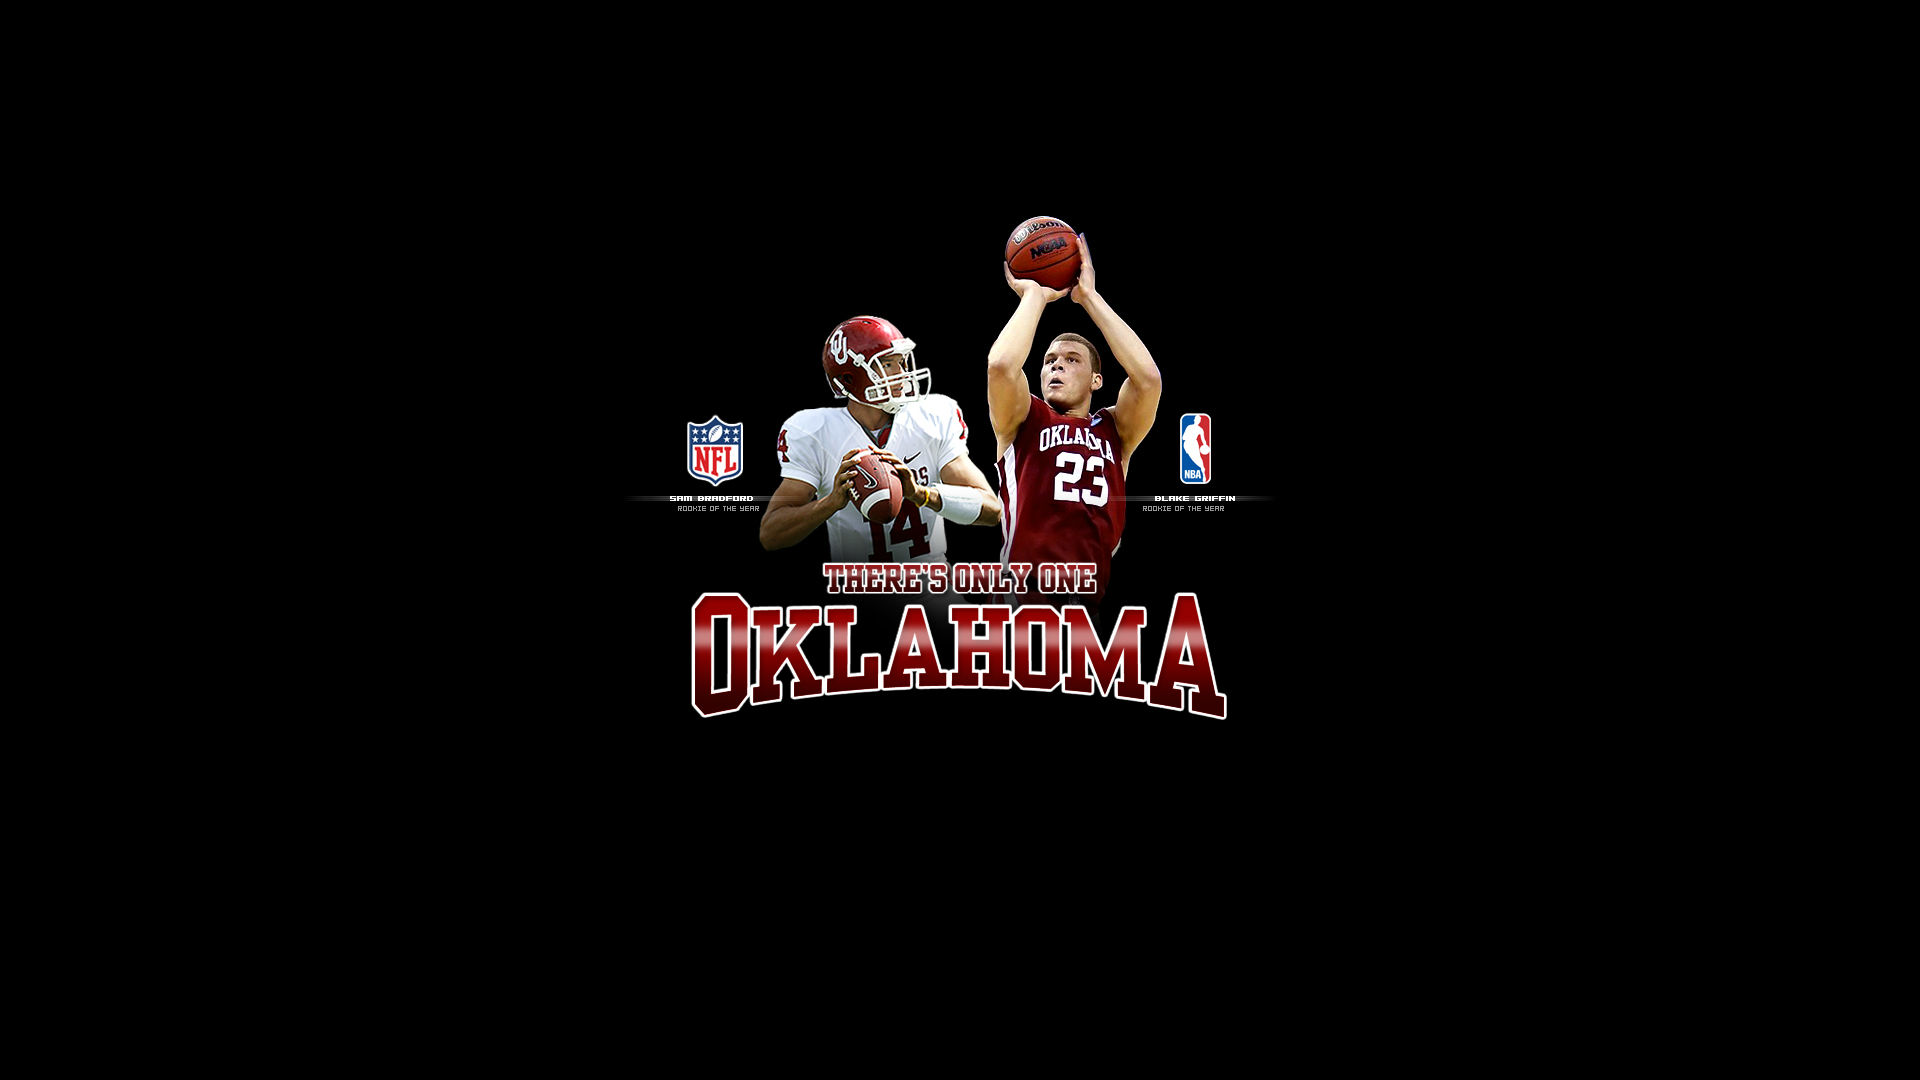 Oklahoma Sports Team Rugby Basketball Sport Wallpaper Picture